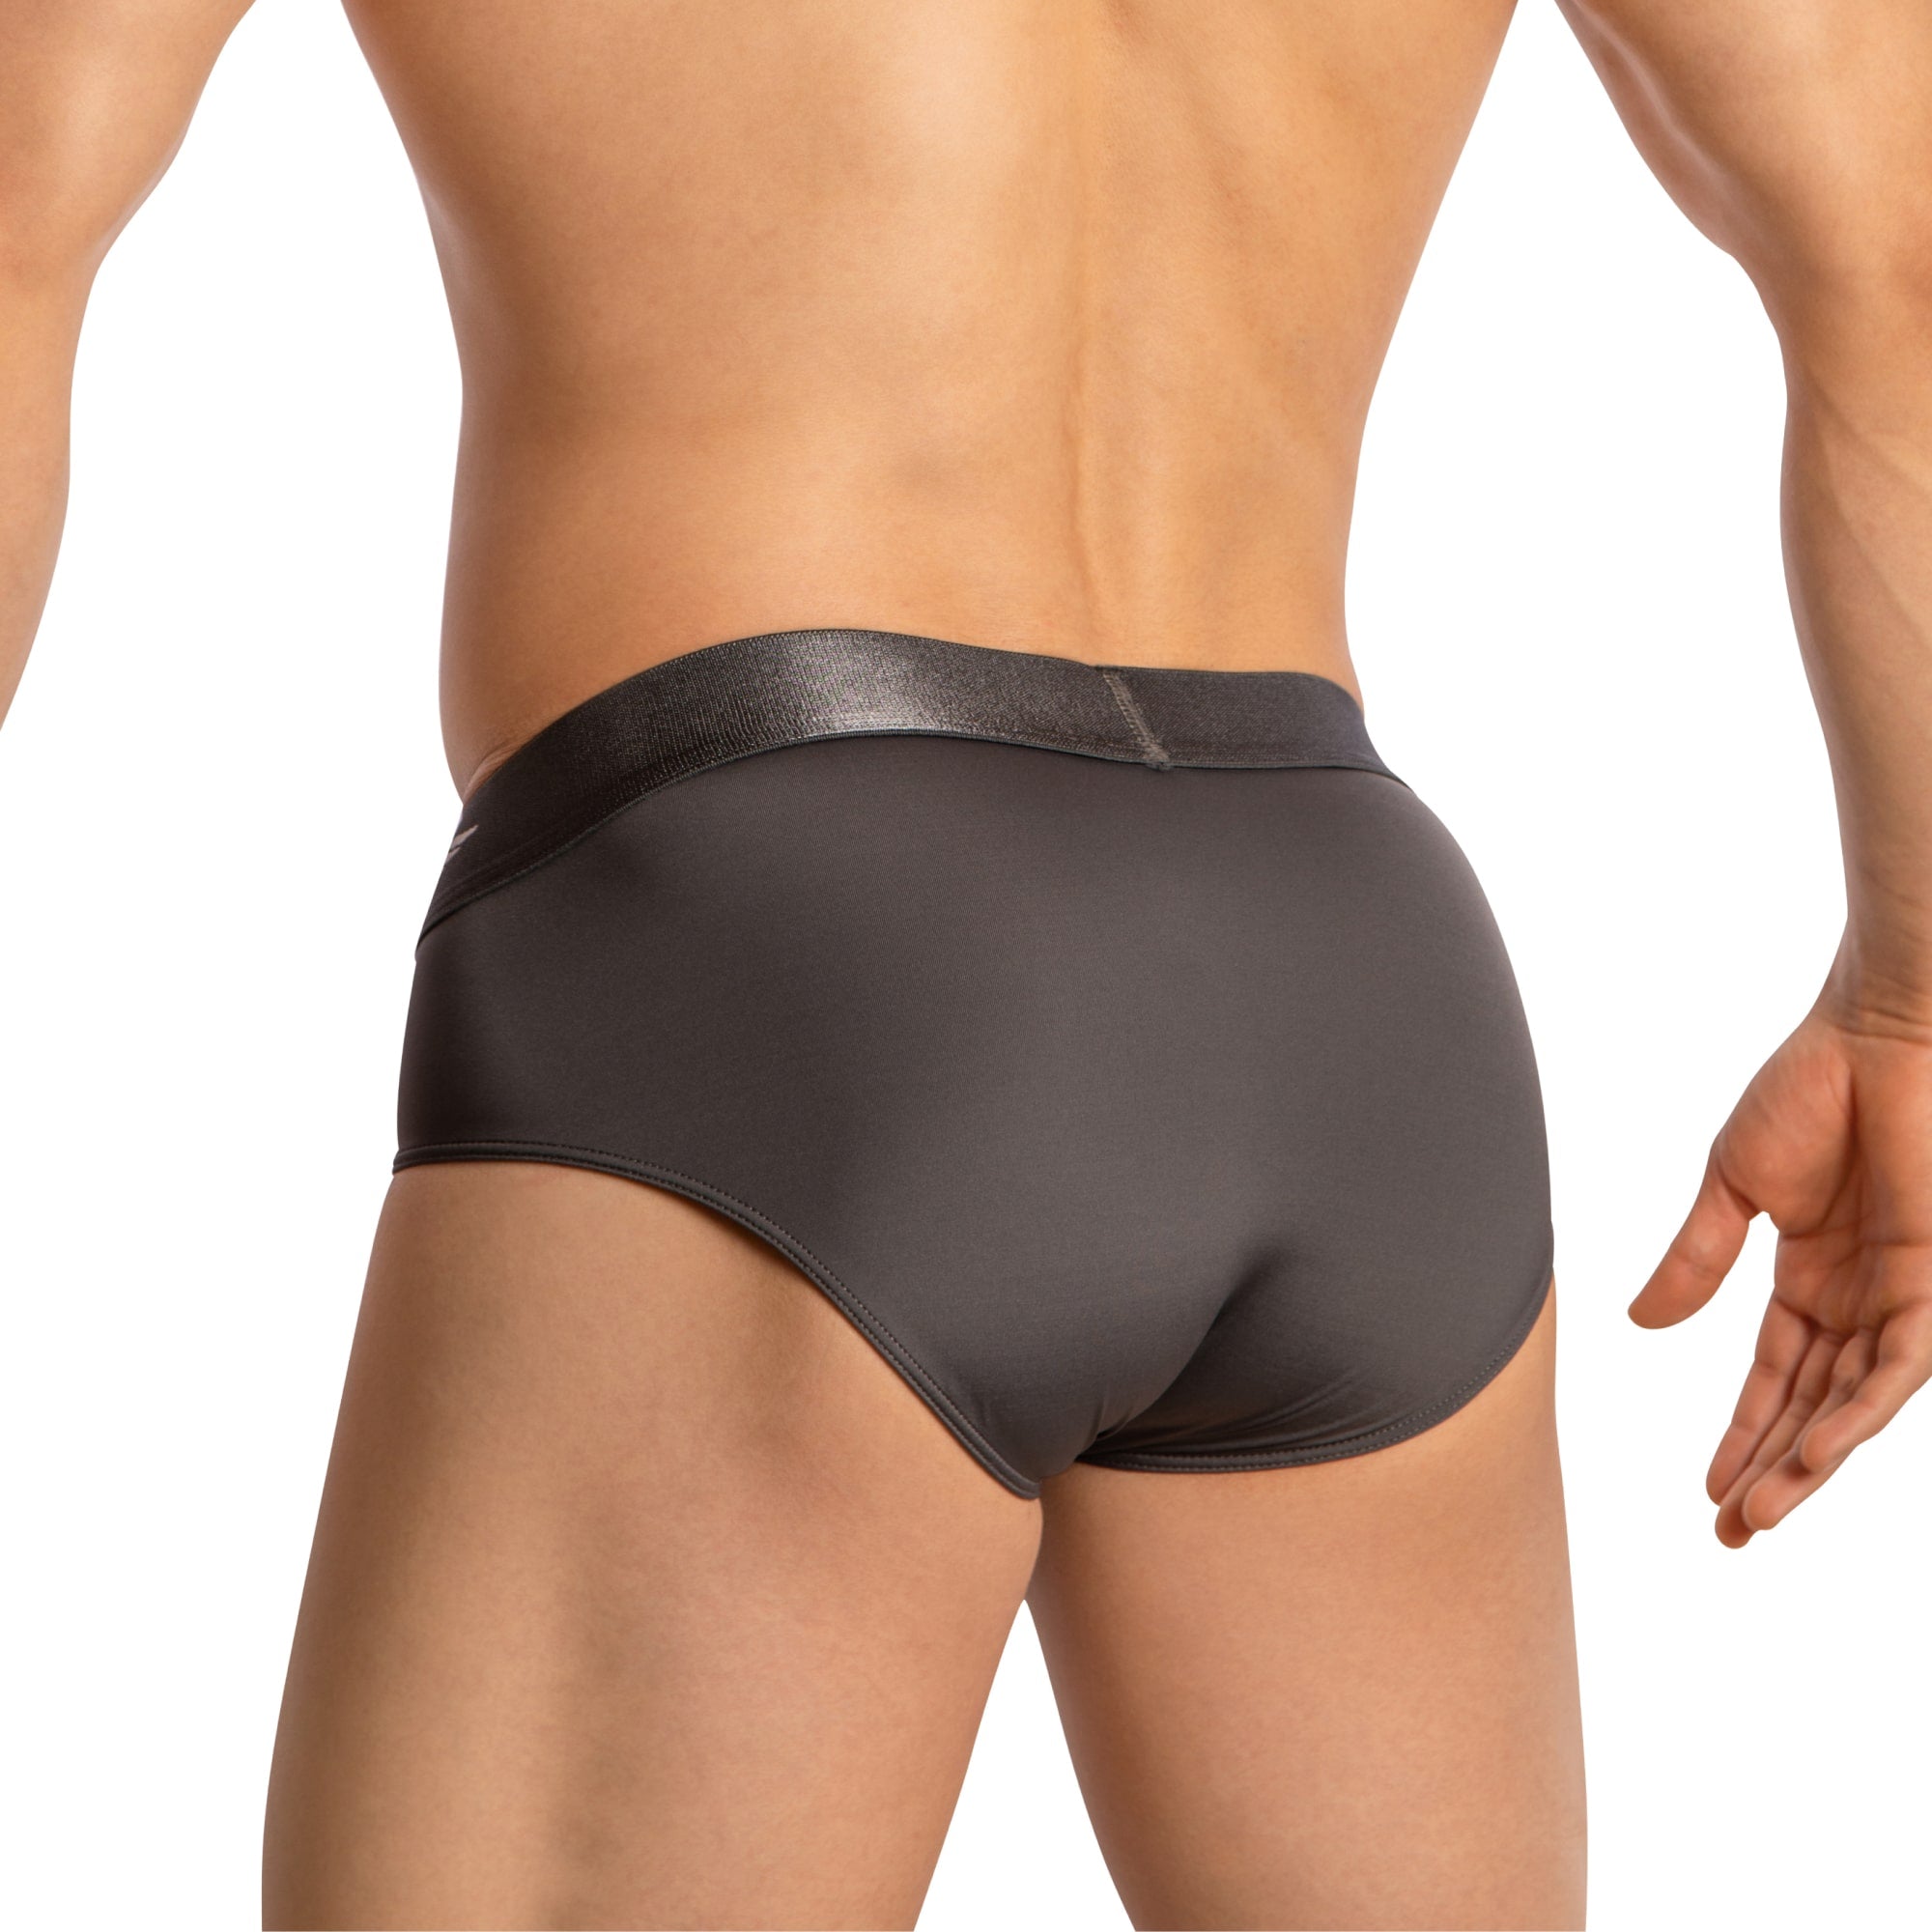 Agacio Sheer Boxer Briefs with Pouch AGJ041 Provocative Men's Underclothing